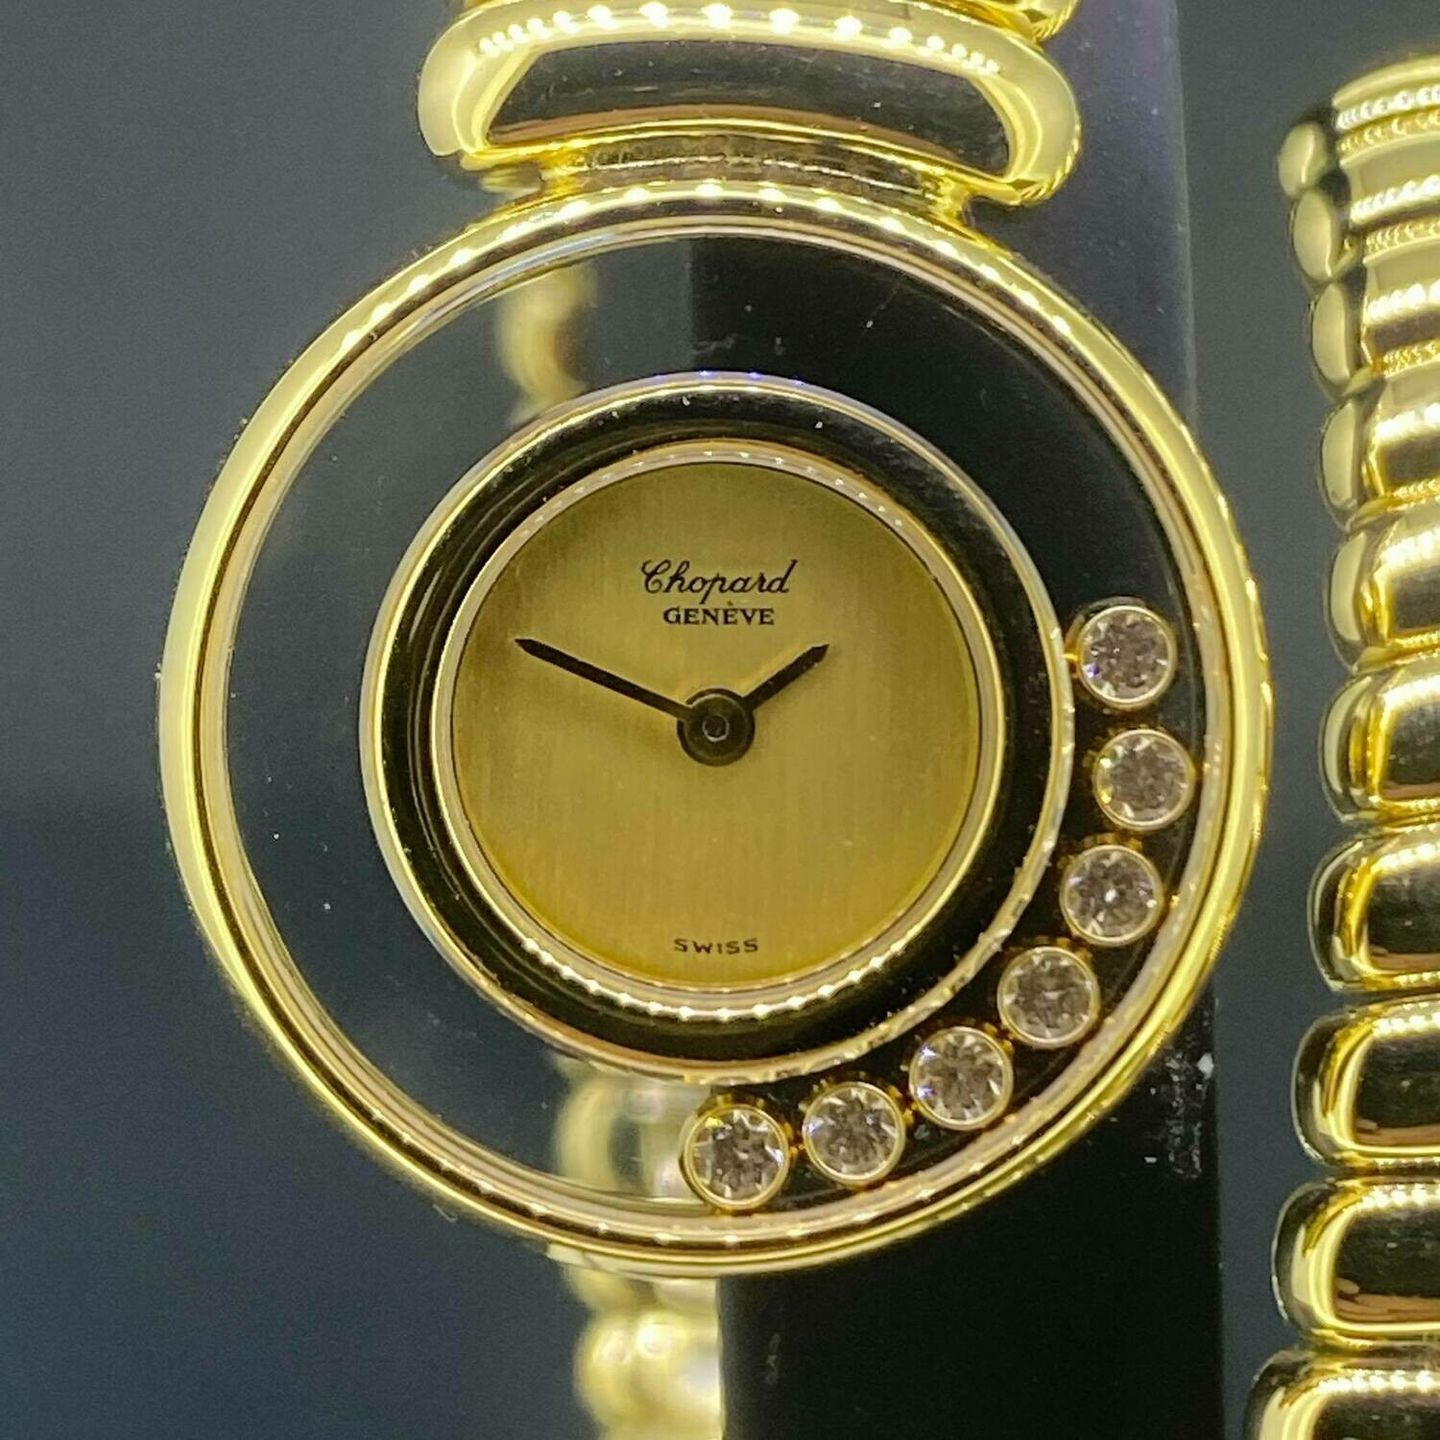 Chopard Happy Sport 4112 (1990) - Yellow dial 22 mm Yellow Gold case (1/6)